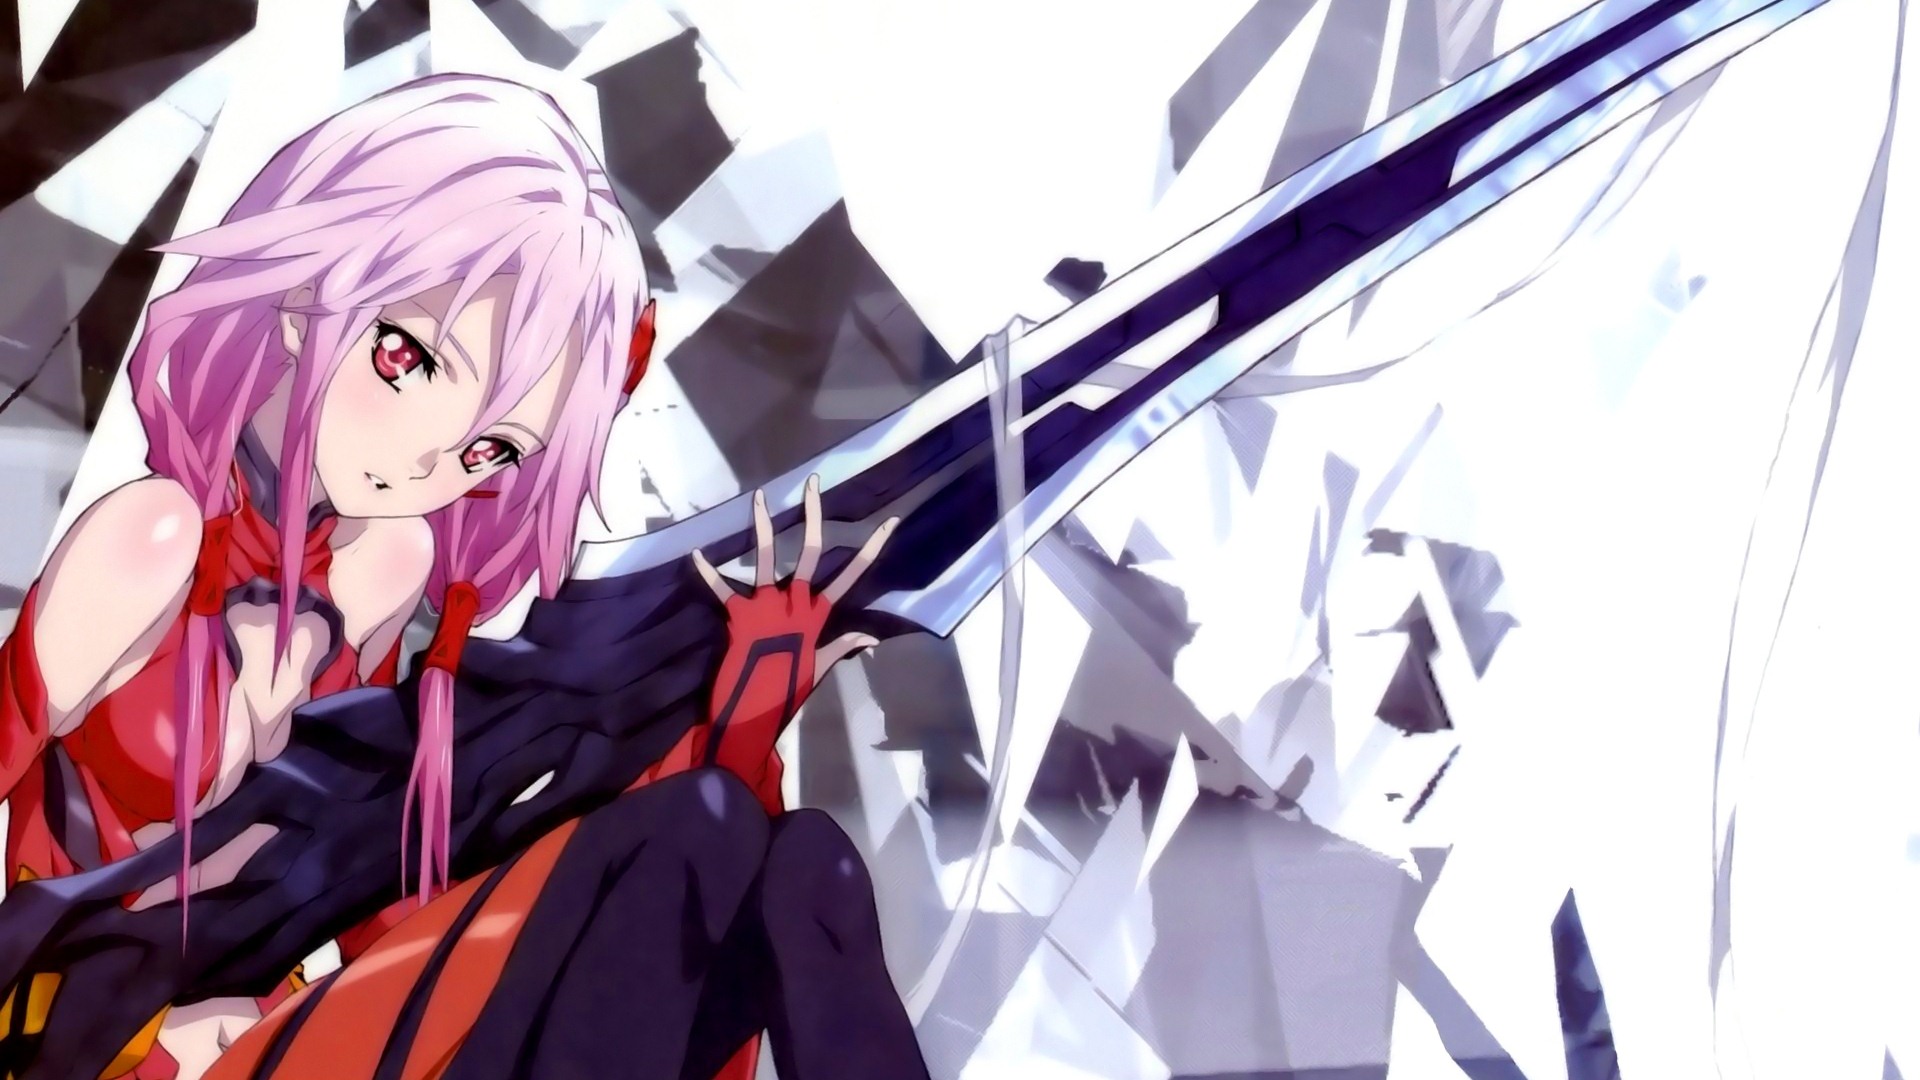 Free Download Guilty Crown Hd Wallpapers Anime Wallpaper Backgrounds Guilty Crown 19x1080 For Your Desktop Mobile Tablet Explore 46 Guilty Crown Wallpaper Hd Guilty Gear Wallpapers Crown Wallpapers Guilty Gear Wallpaper